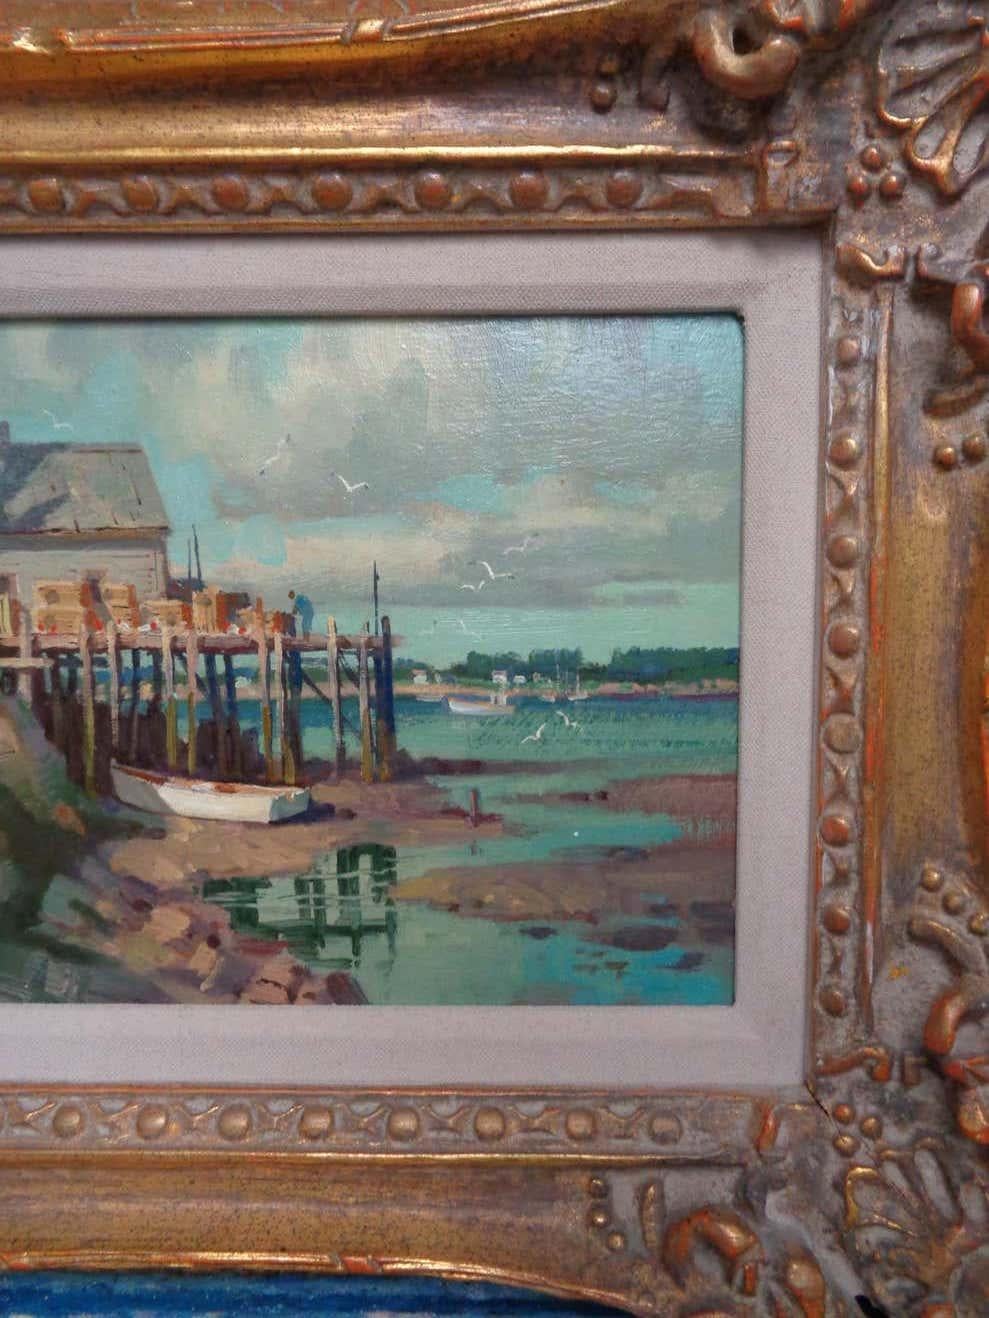   Paul Strisik Marine Painting American Impressionist National Academy Rockport For Sale 3